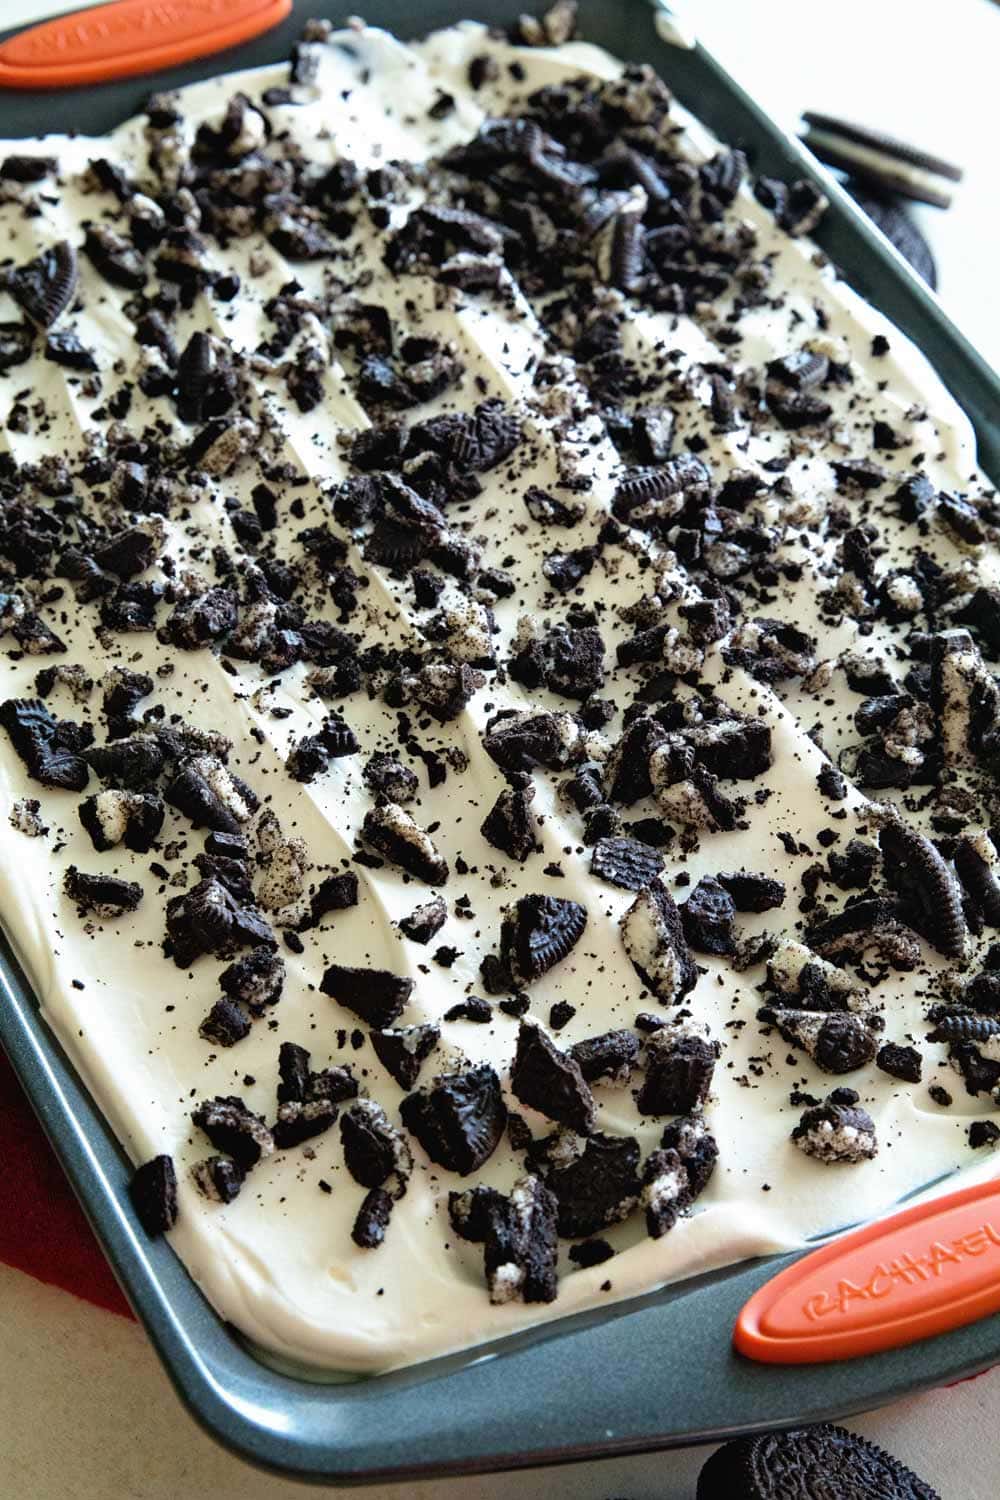 Oreo Puddin' Poke Cake ~ Chocolate Cake Topped with Oreo Pudding, Cool Whip and Crushed Oreos! Quick, Easy Poke Cake That Everyone Will Love!